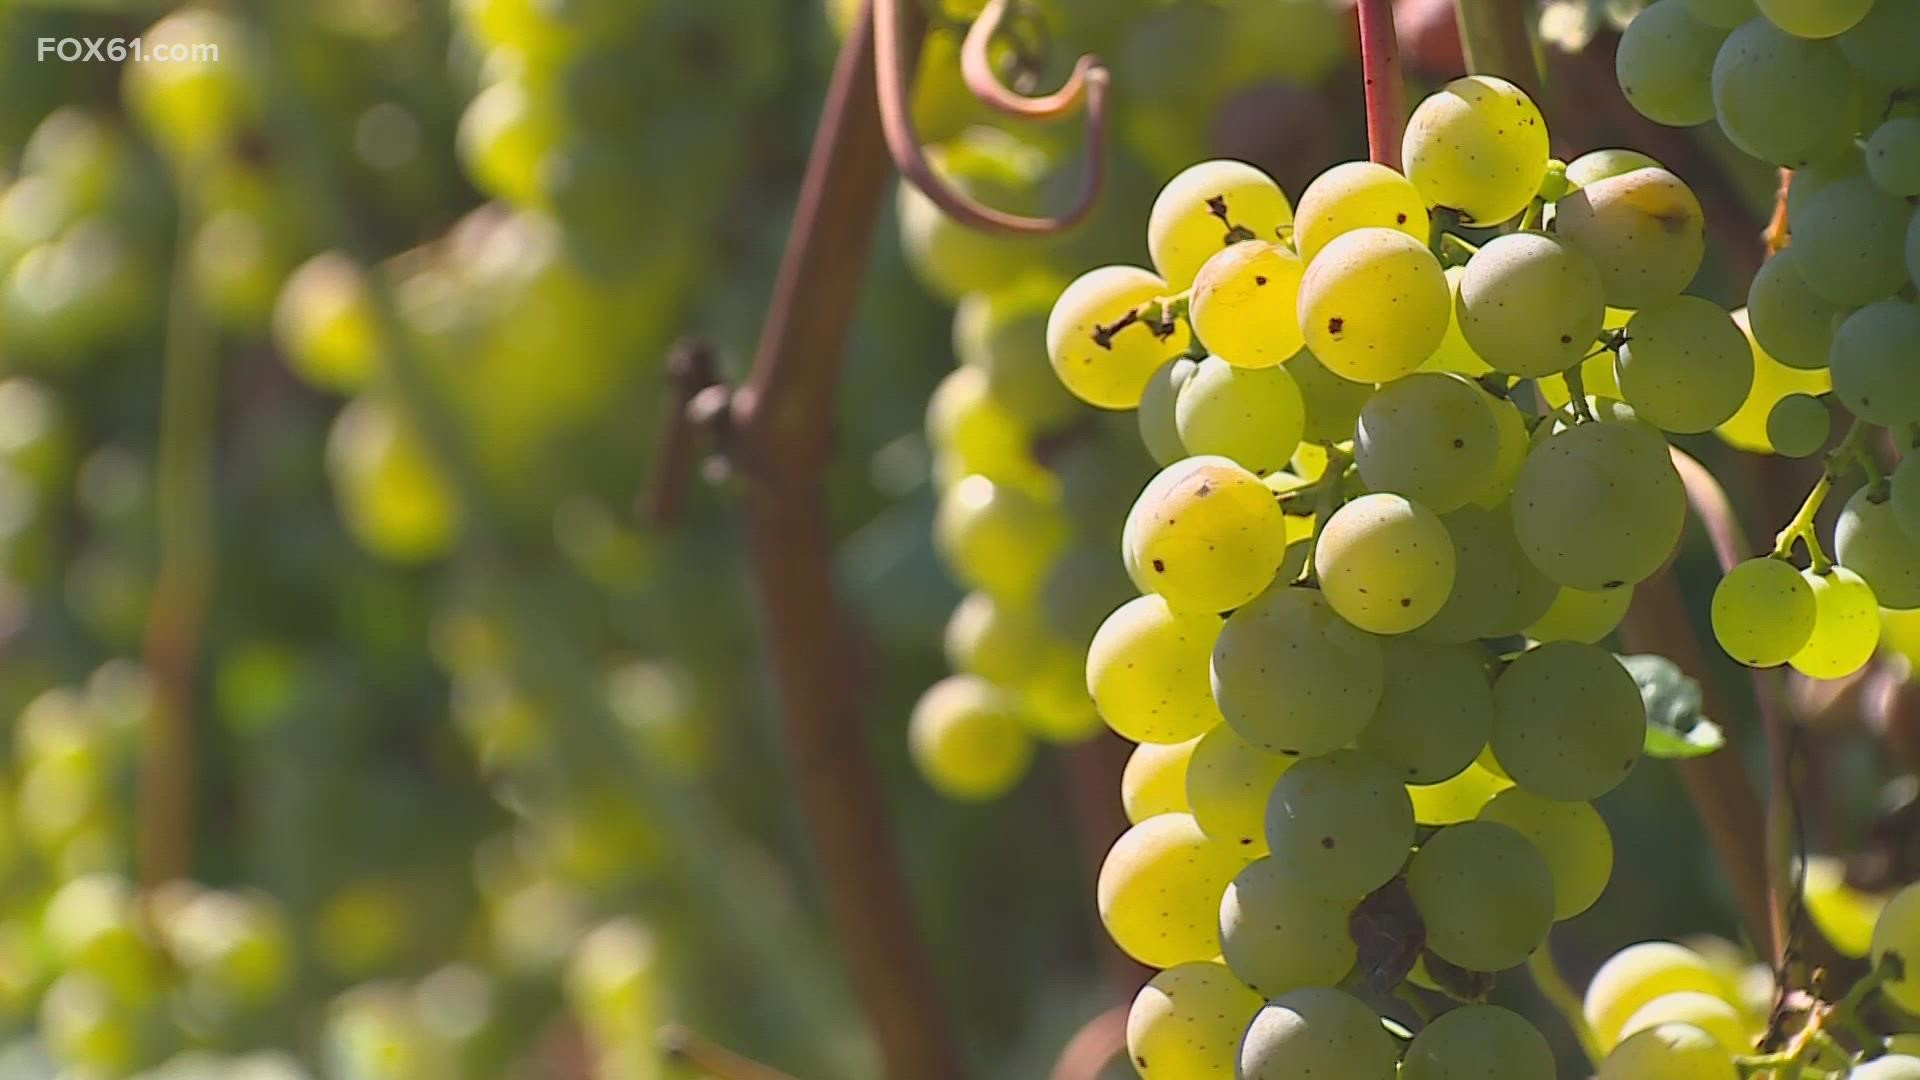 While drought conditions have hampered crops all across Connecticut, at Lost Acres Vineyard in North Granby, the grapes have held up – that’s not a surprise.